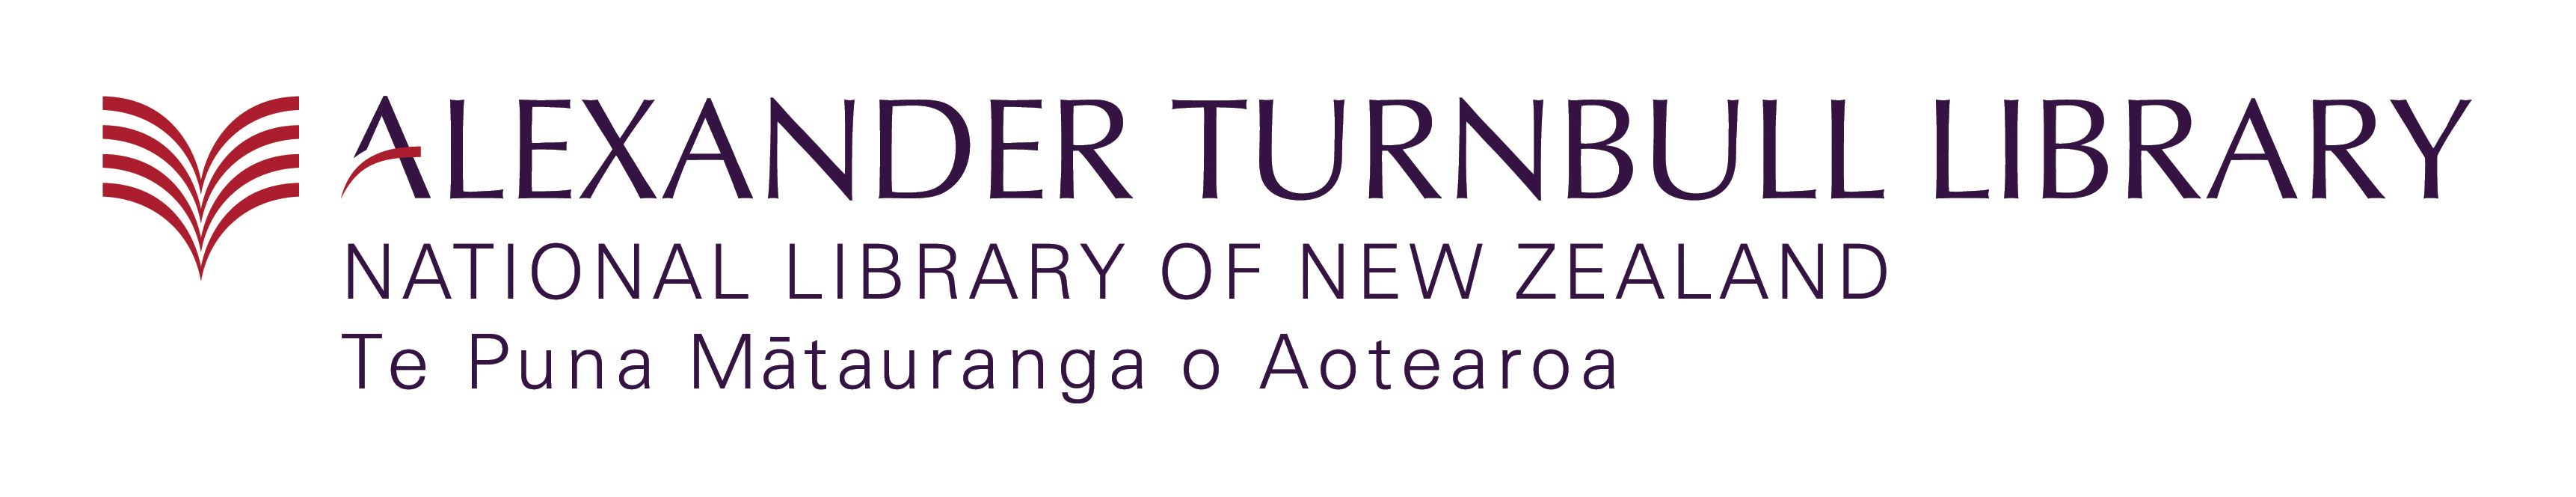 Alexander Turnbull Library, National Library of New Zealand